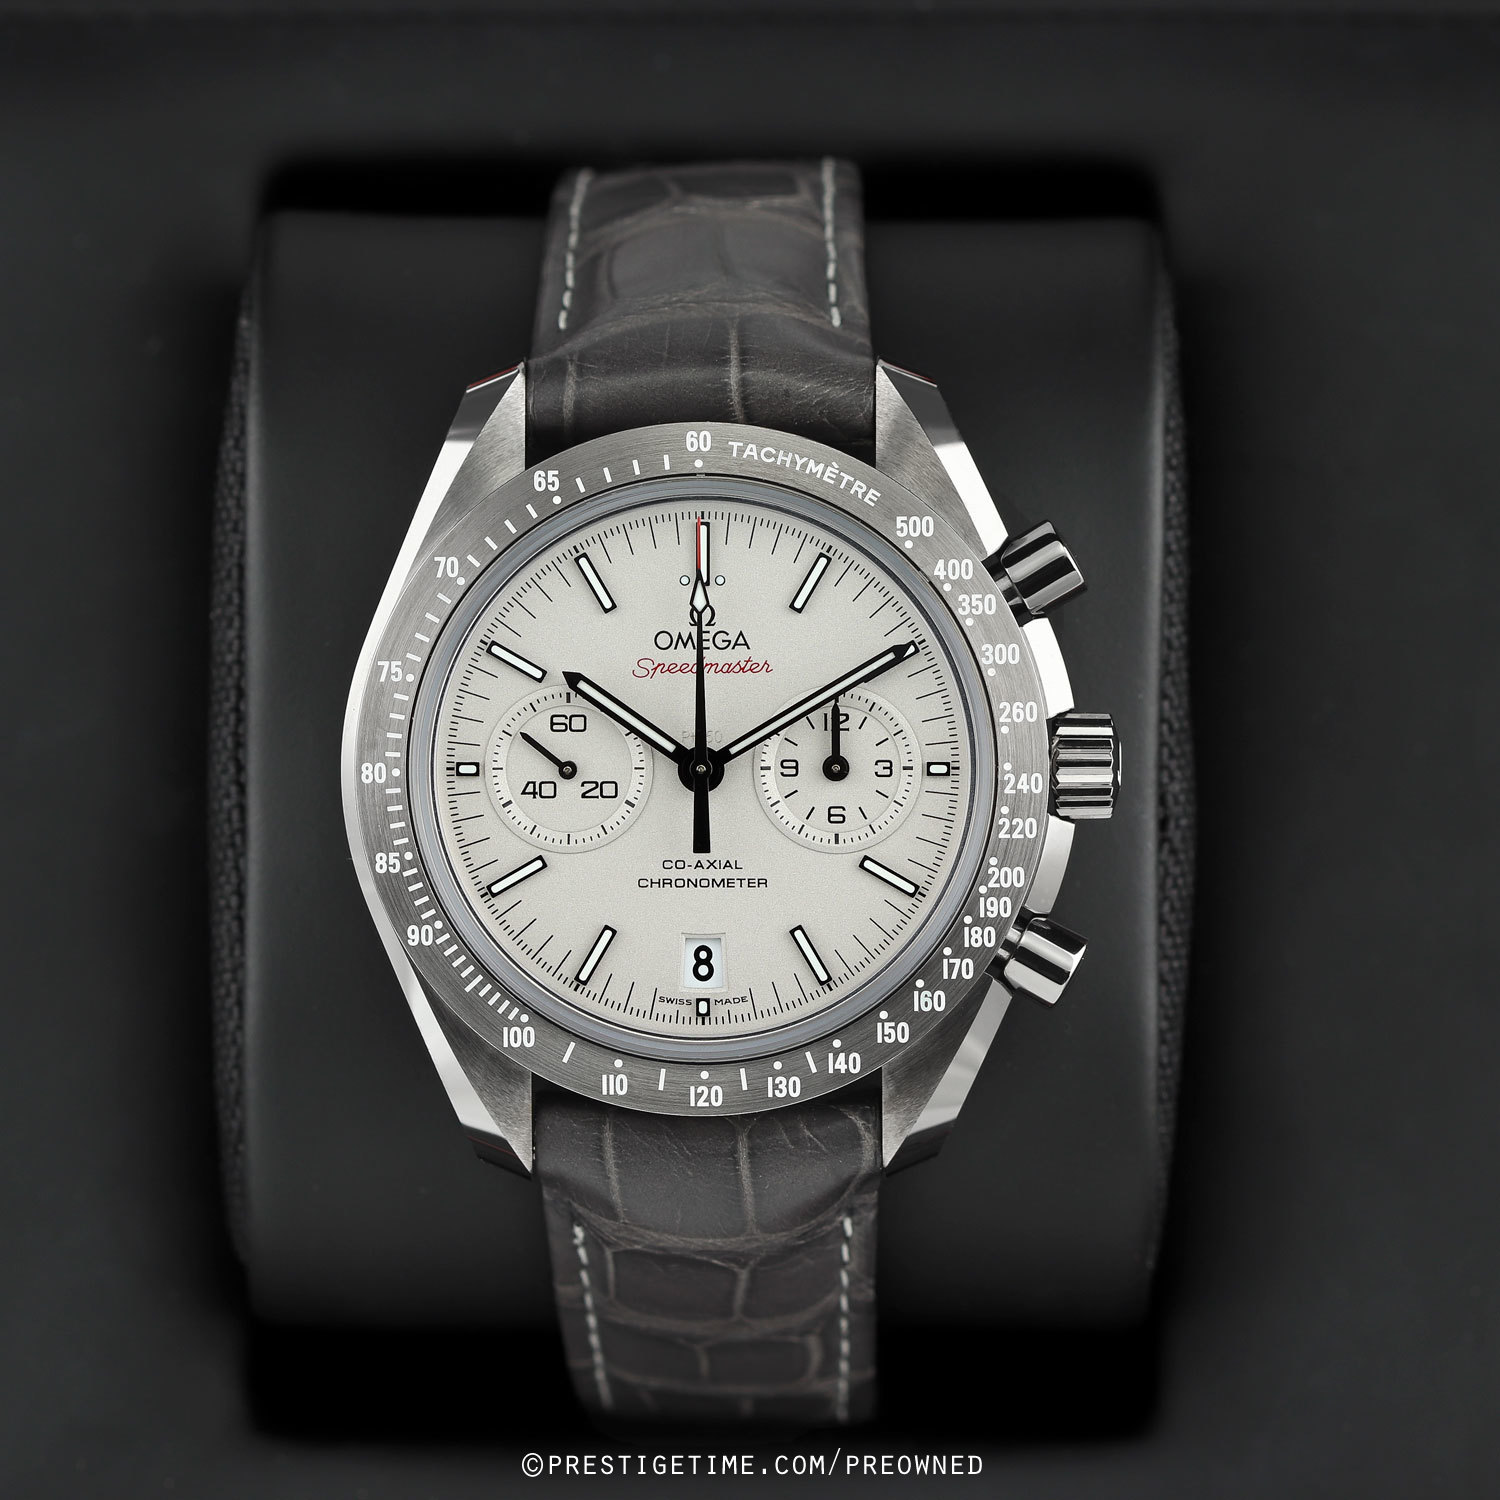 Pre-owned Omega Omega Speedmaster Grey Side Of The Moon 311.93 